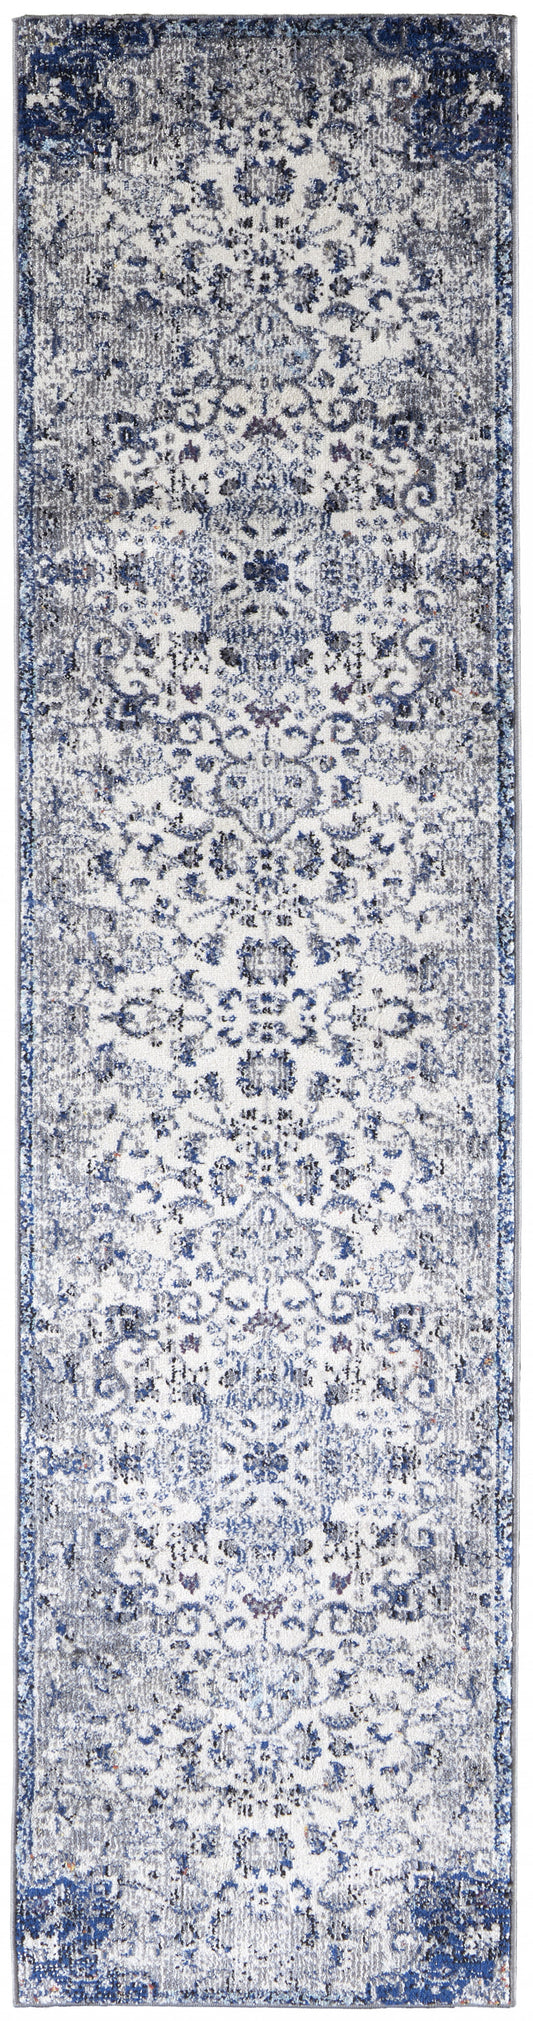 7' X 10' Ivory Gray And Blue Floral Power Loom Distressed Stain Resistant Area Rug